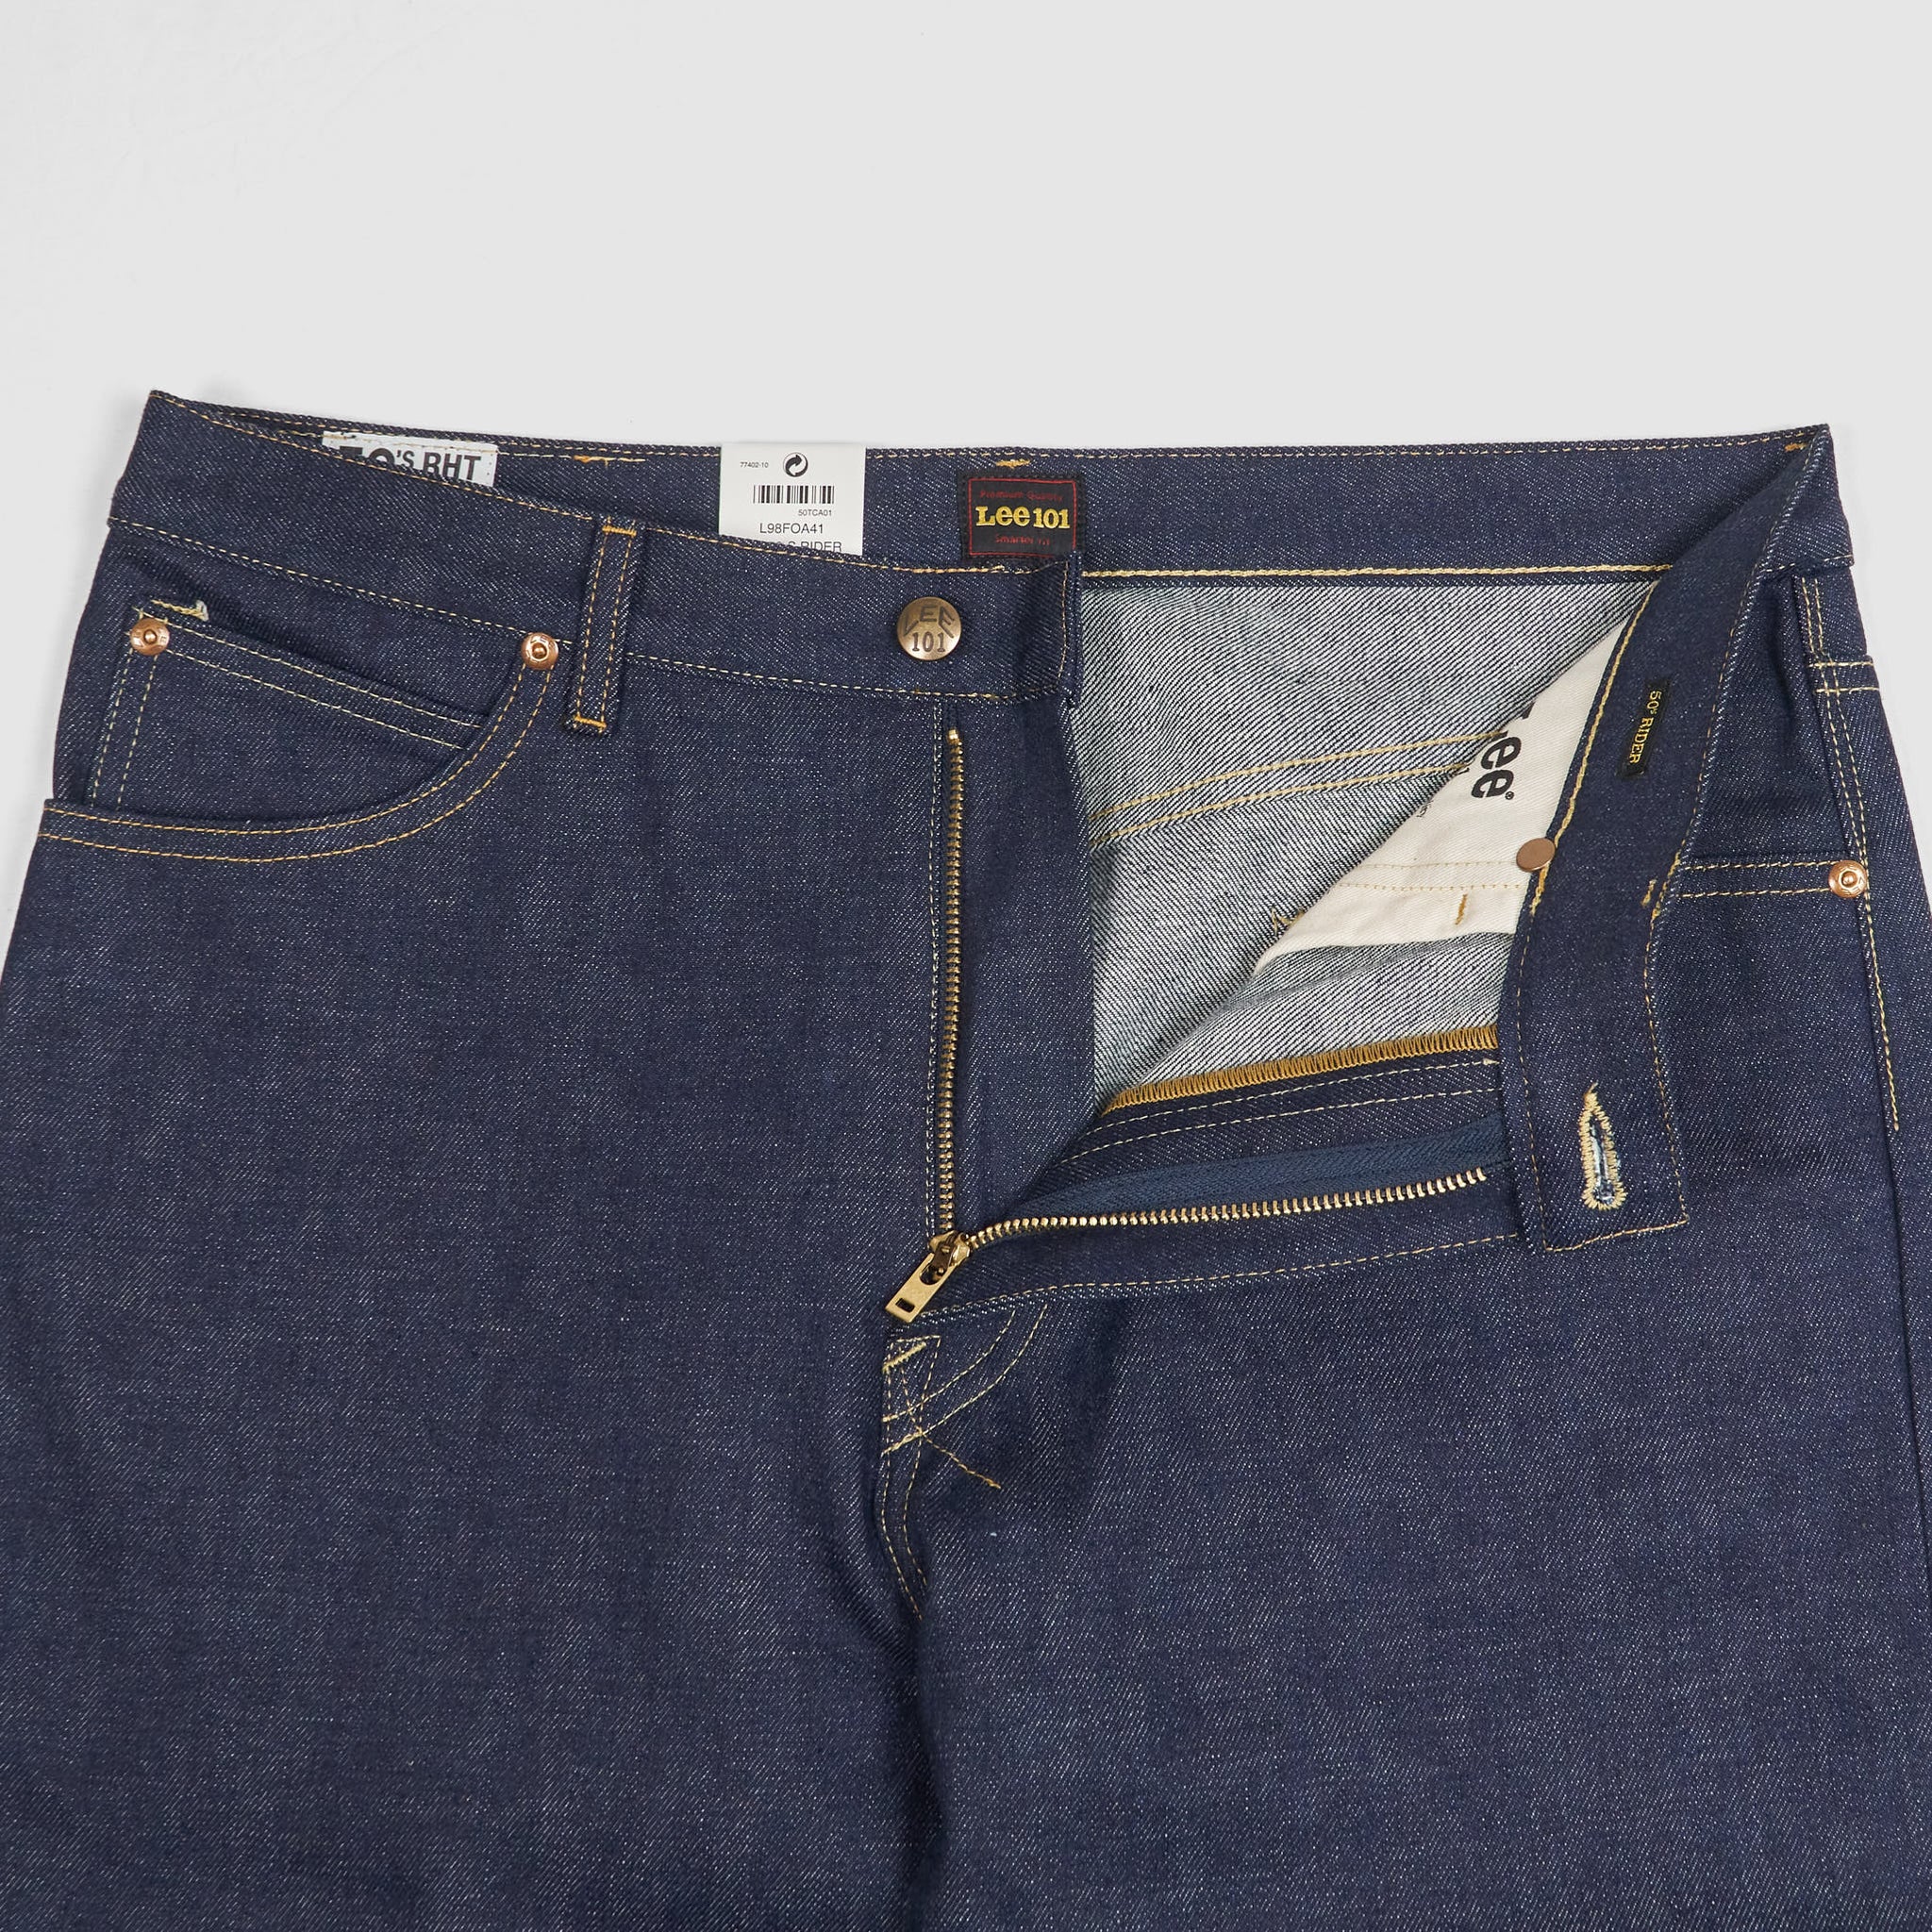 Lee 101 50s Rider Jeans - DeeCee style